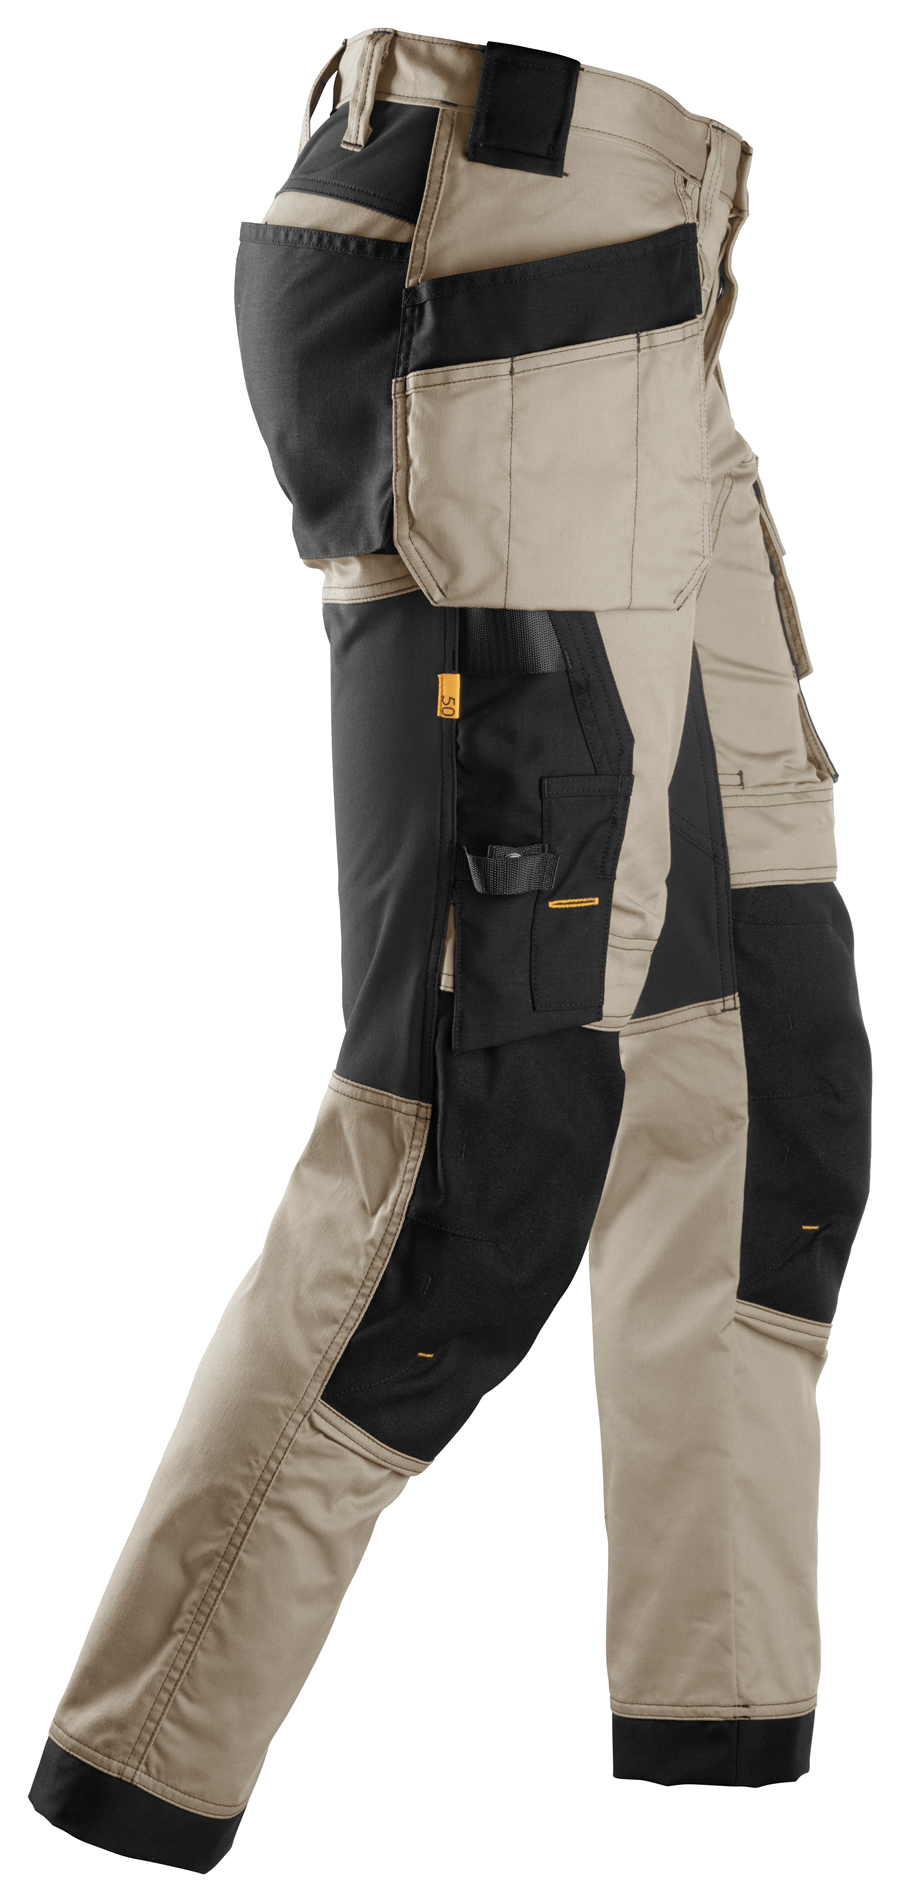 WORKPLACE STRETCHABLE PANTS WITH MANY POCKETS AND KNEEPADS